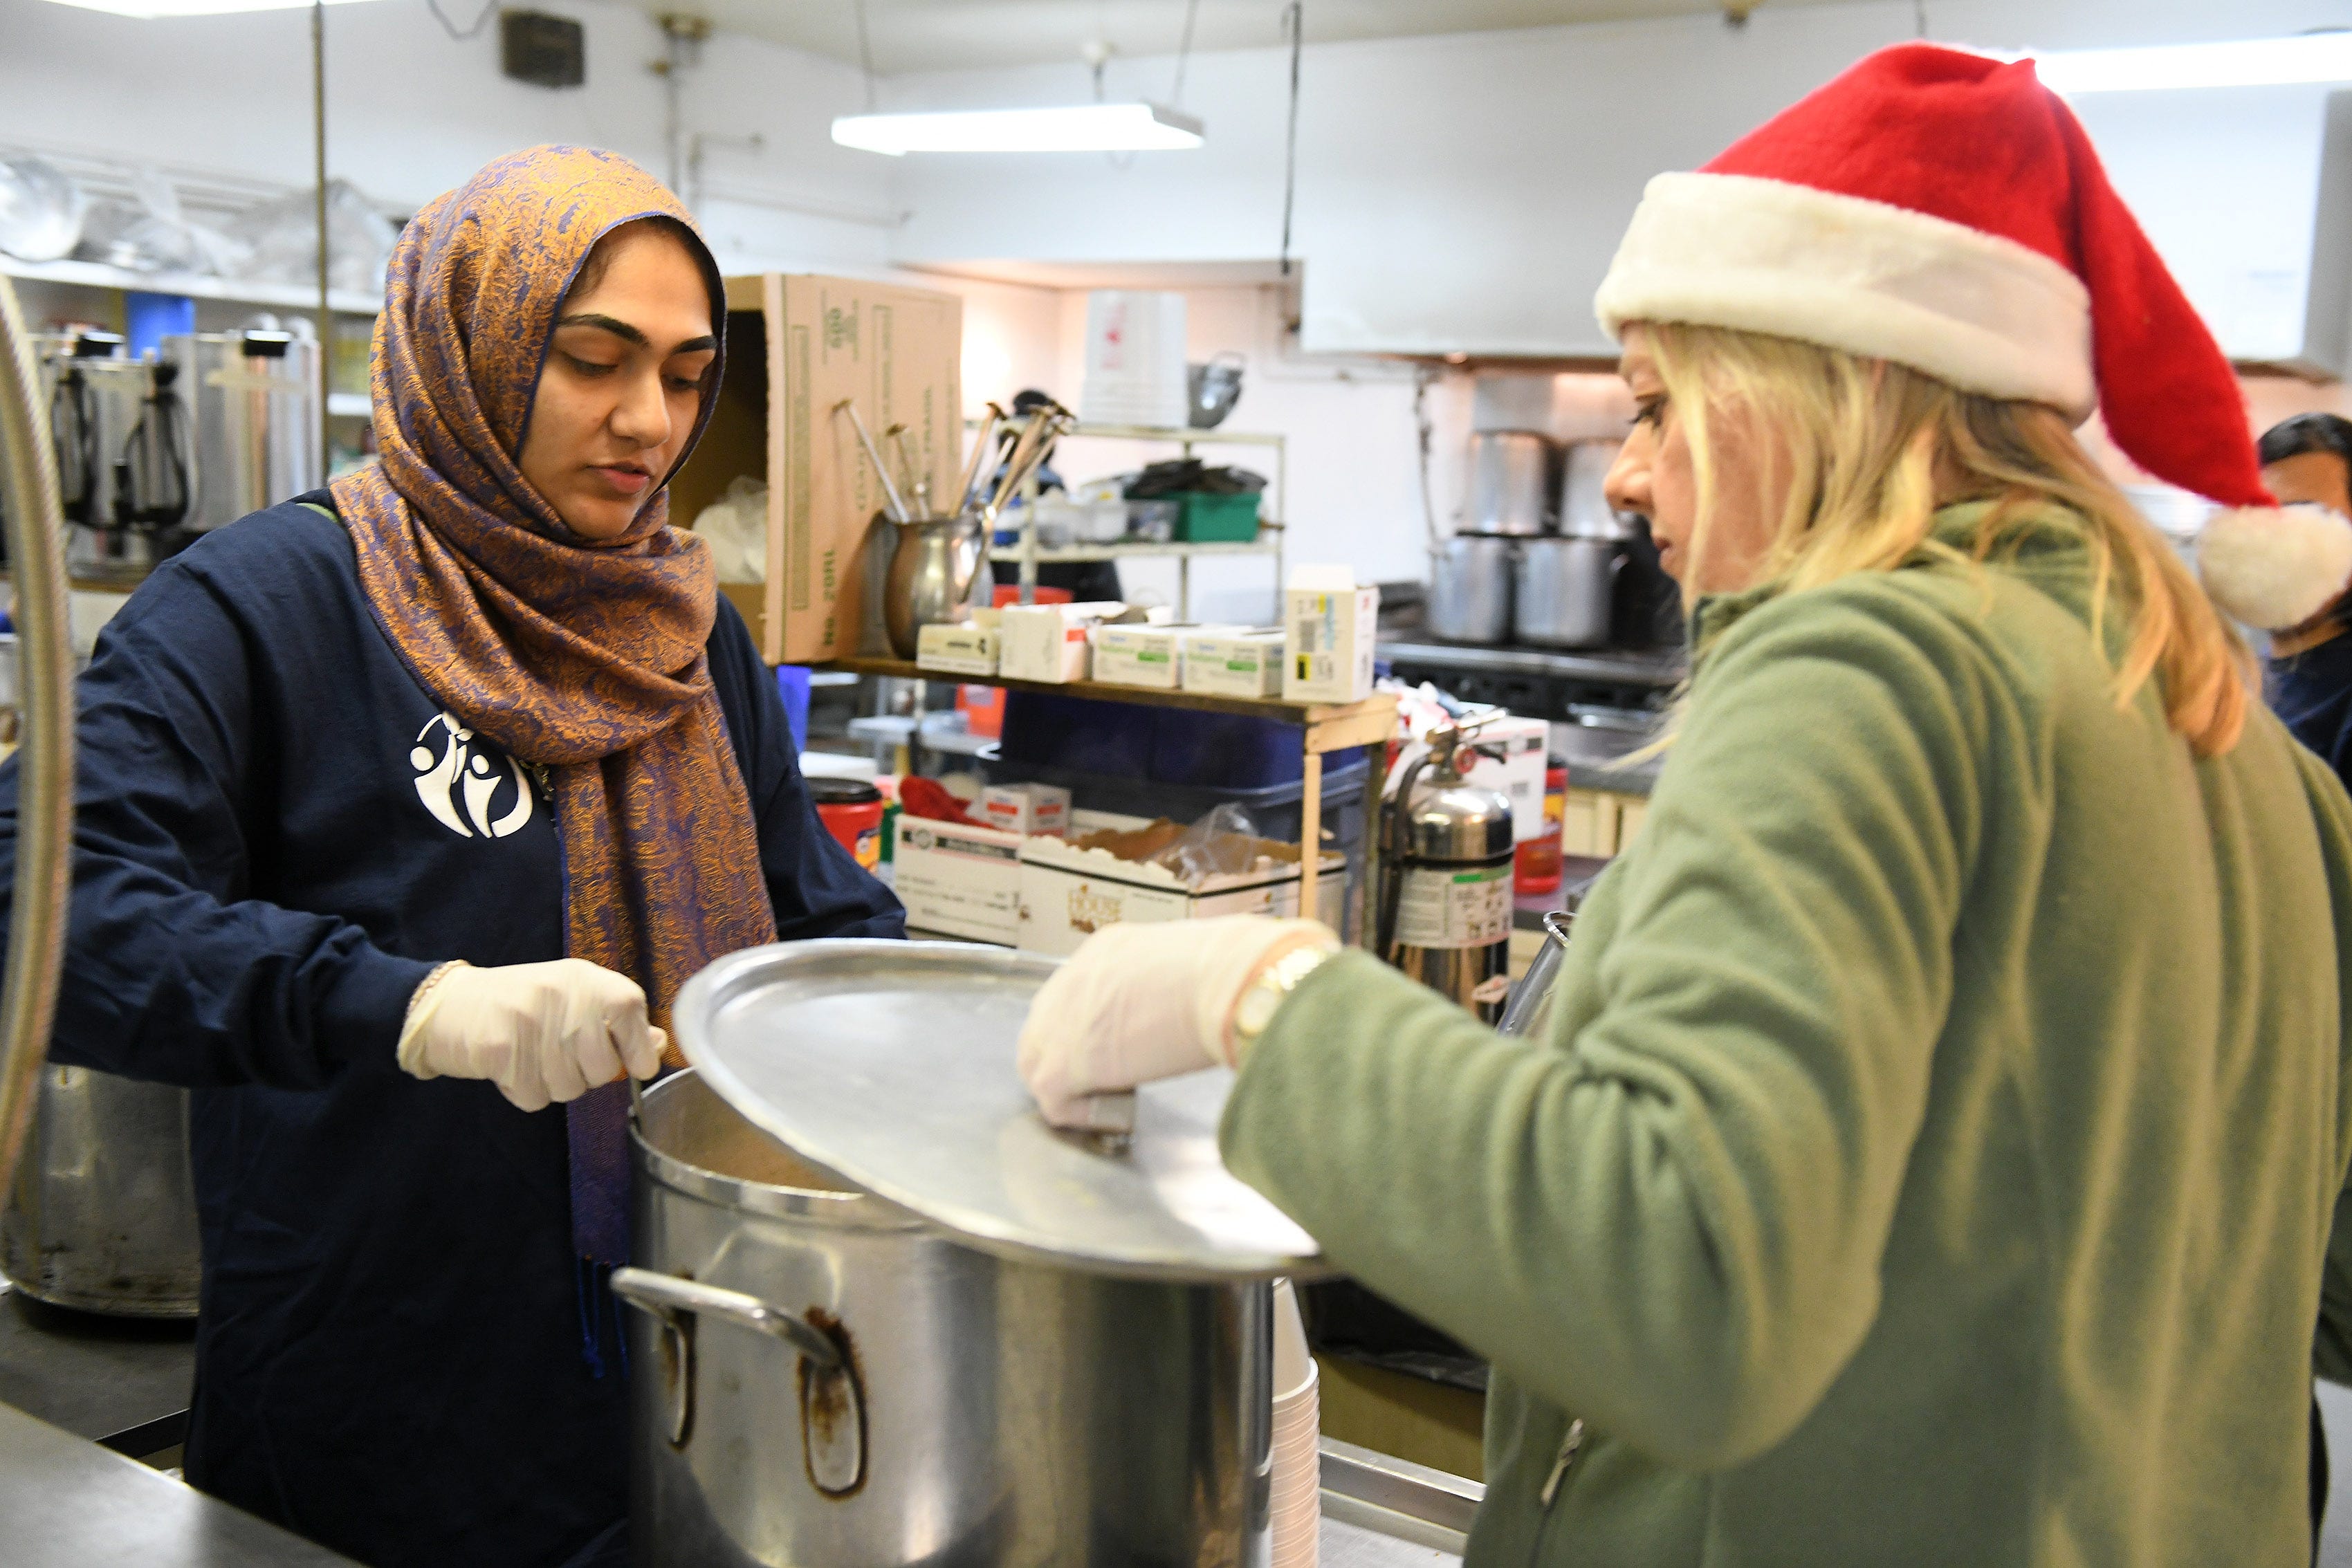 Mercy-USA for Aid and Development volunteer Hibah Naseer  22 of Canton, left, checks on a pot of soup with volunteer from Northville, Karen Schaumann. Muslim volunteers organized by Mercy-USA for Aid and Development serve food at St. Peter's Episcopal Church in Detroit on Dec. 24, 2018.